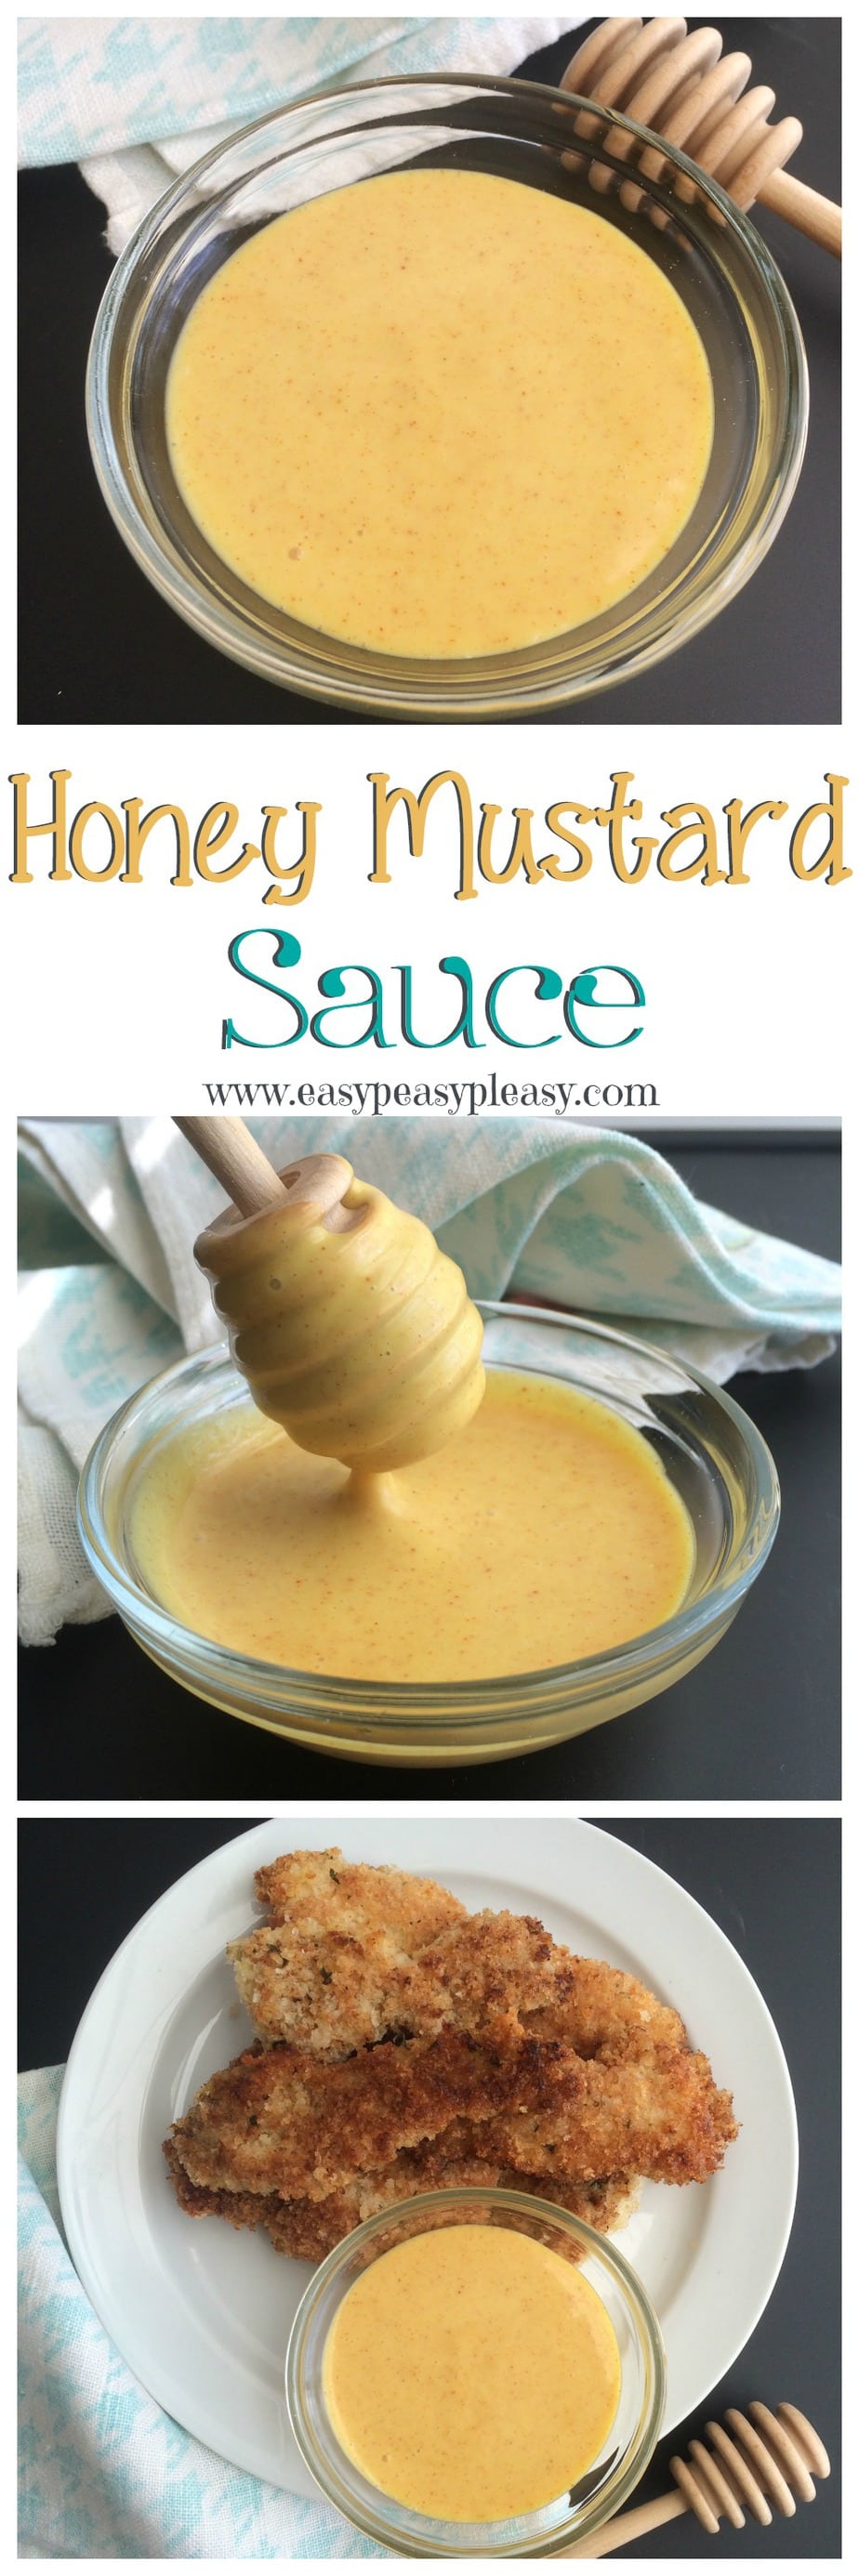 This delicious Honey Mustard Sauce is great for dipping, sandwiches, and marinades using only 4 Ingredients